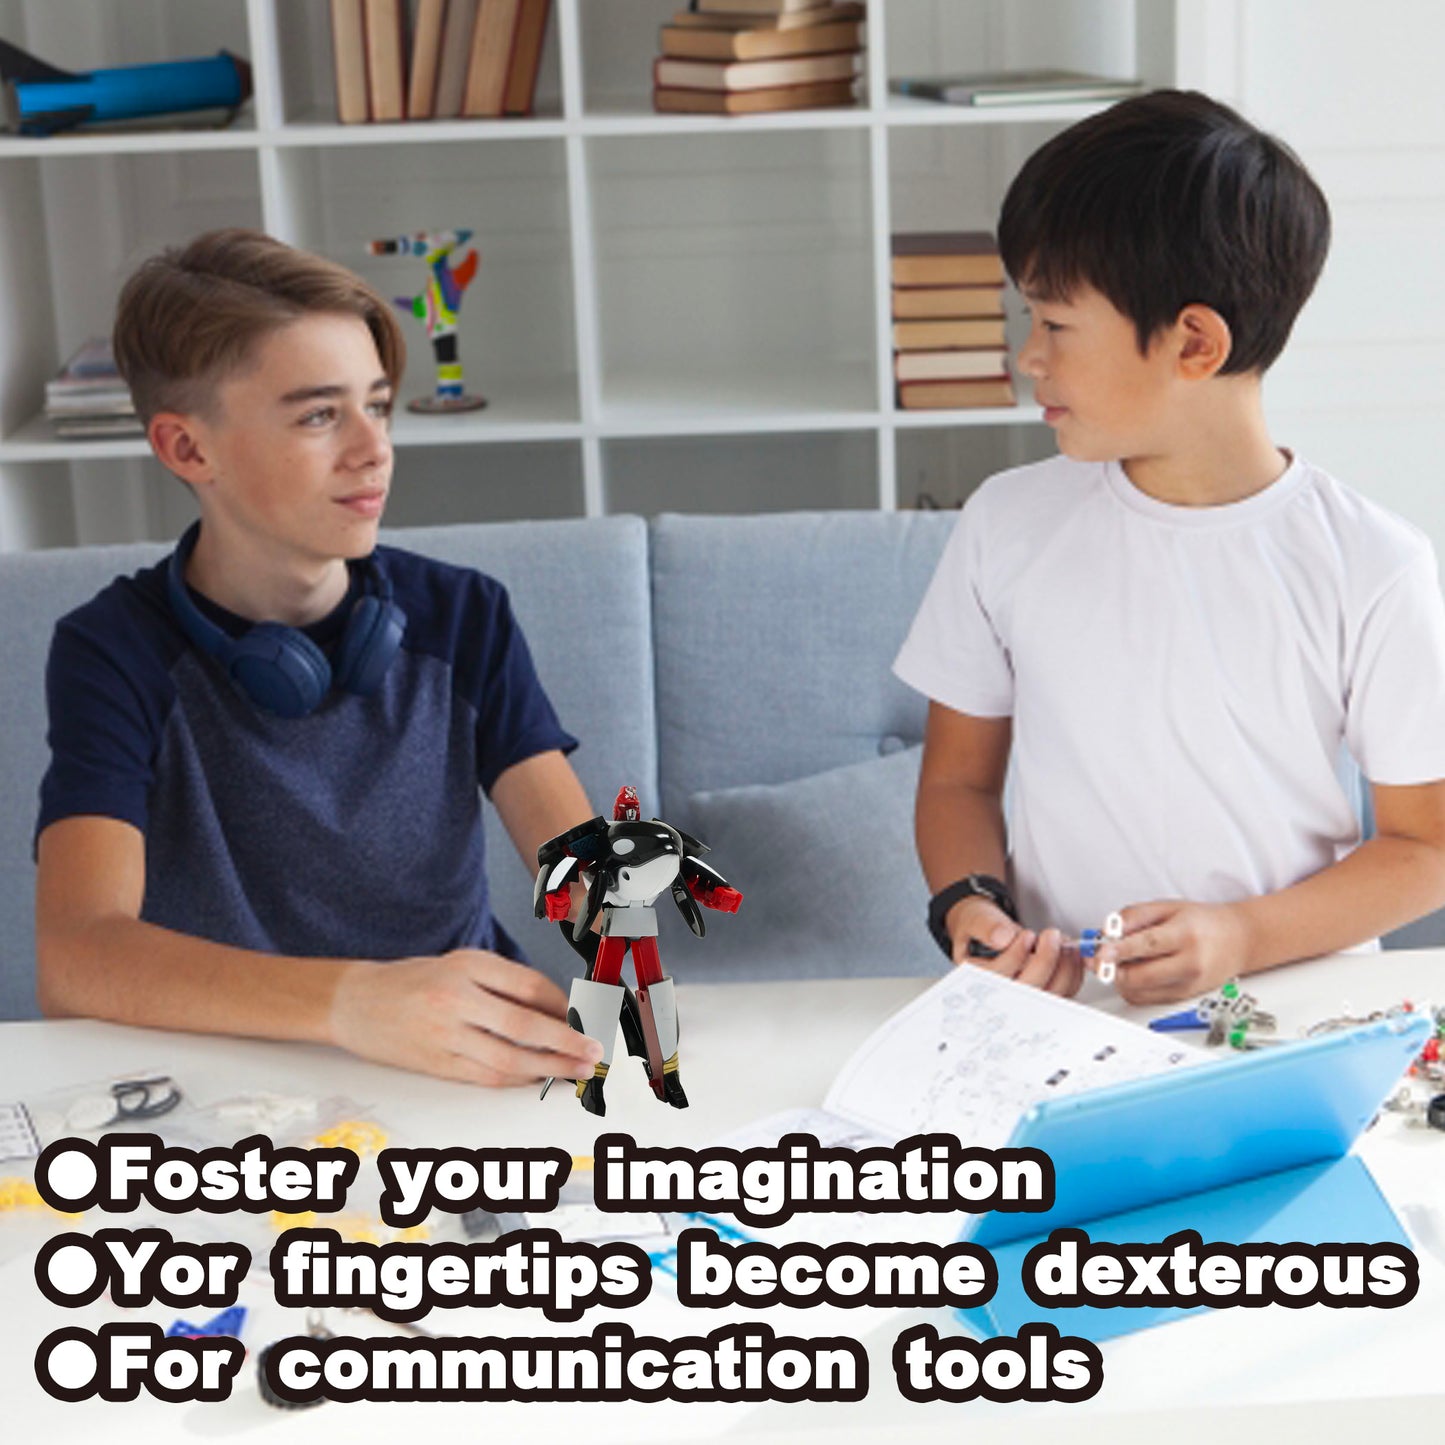 Foster your imagination. Your fingertips become dexterous. For communication tools. Transform Robot Killer Whale Figurine Animal Toy